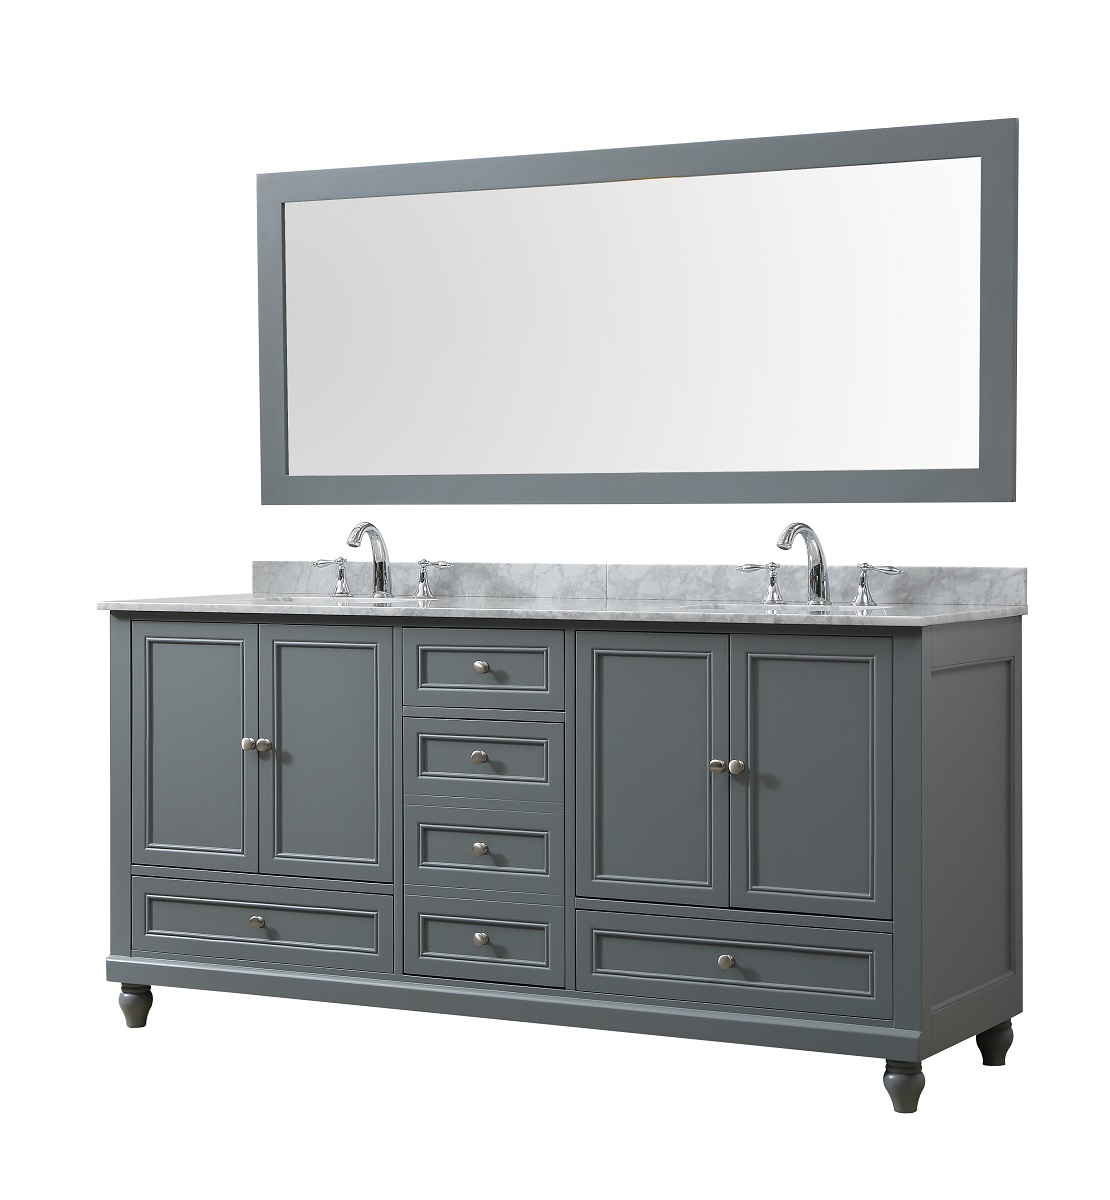 Premium 72" Bath and Makeup Hybrid Vanity in gray with Carrara White Marble Vanity Top with white basins